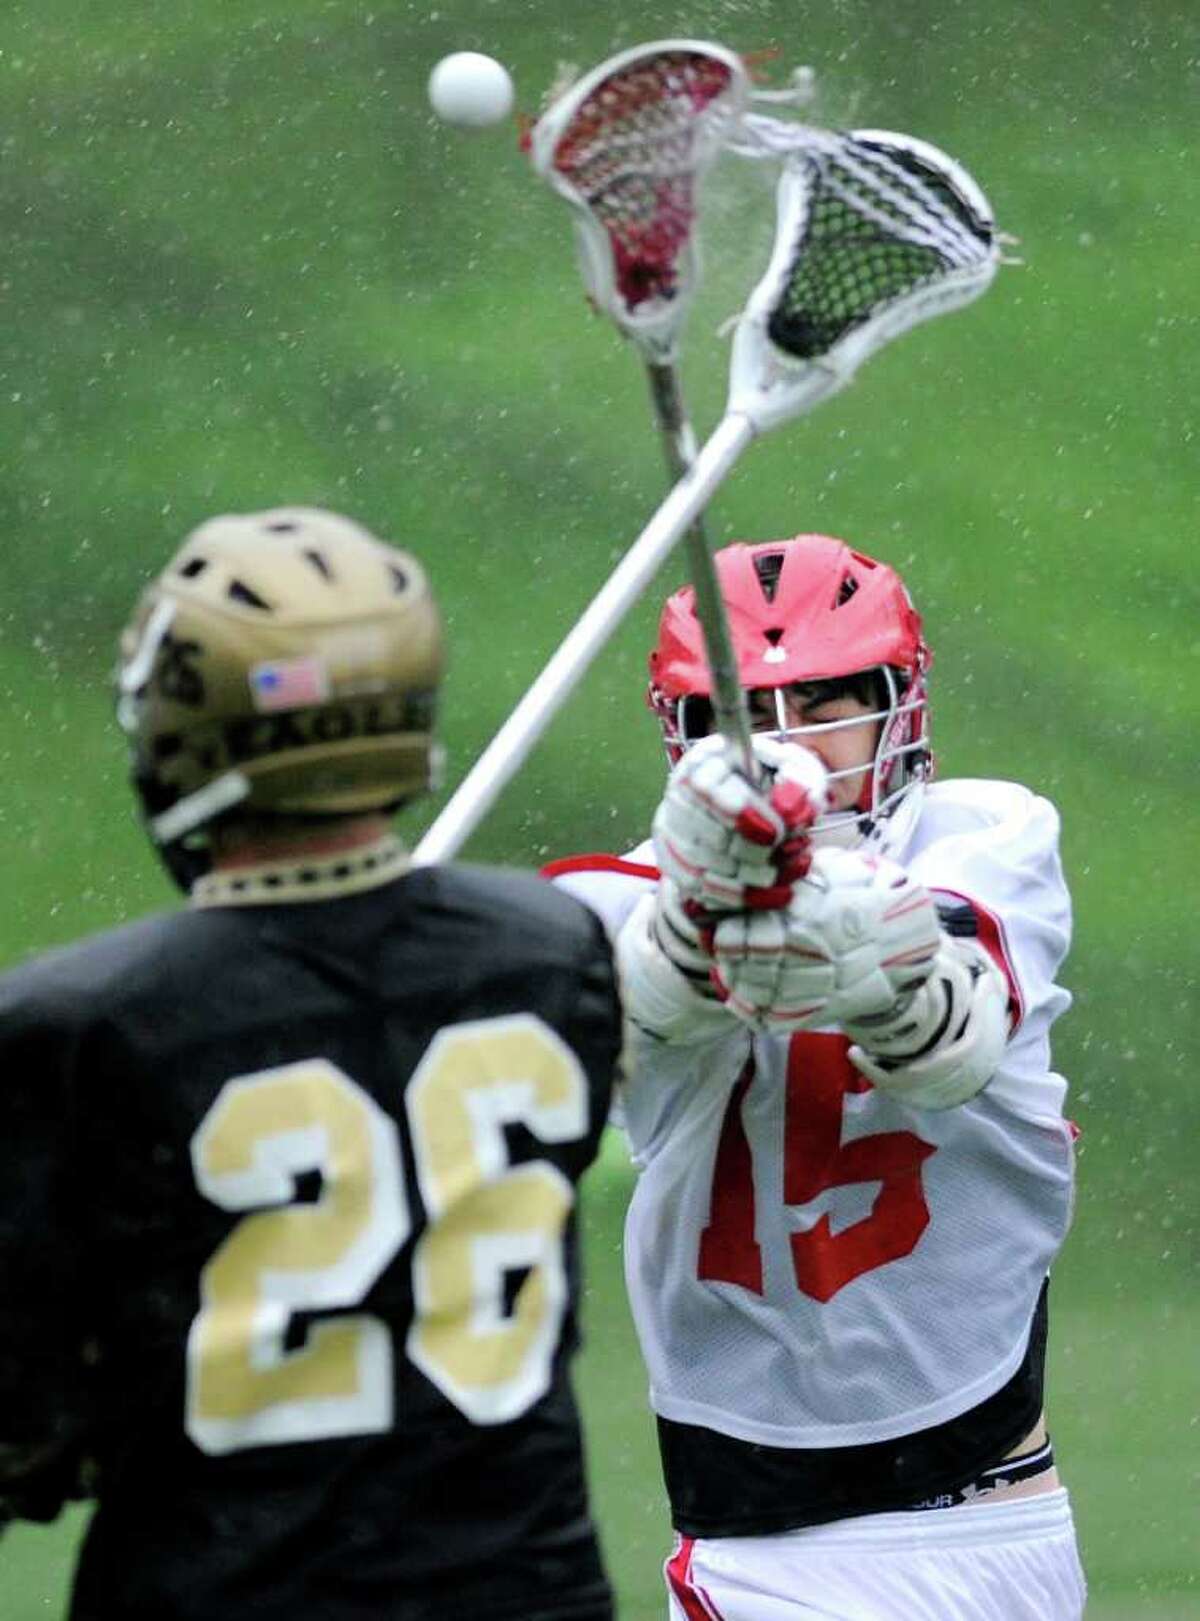 Joseph Riehl of Trumbull High School, left, # 26, passes while being defended by Kyle Foote, # 15 of Greenwich High School, during boys high school lacrosse game between Greenwich High School and Trumbull High School at Greenwich High School, Wednesday afternoon, May 18, 2011.